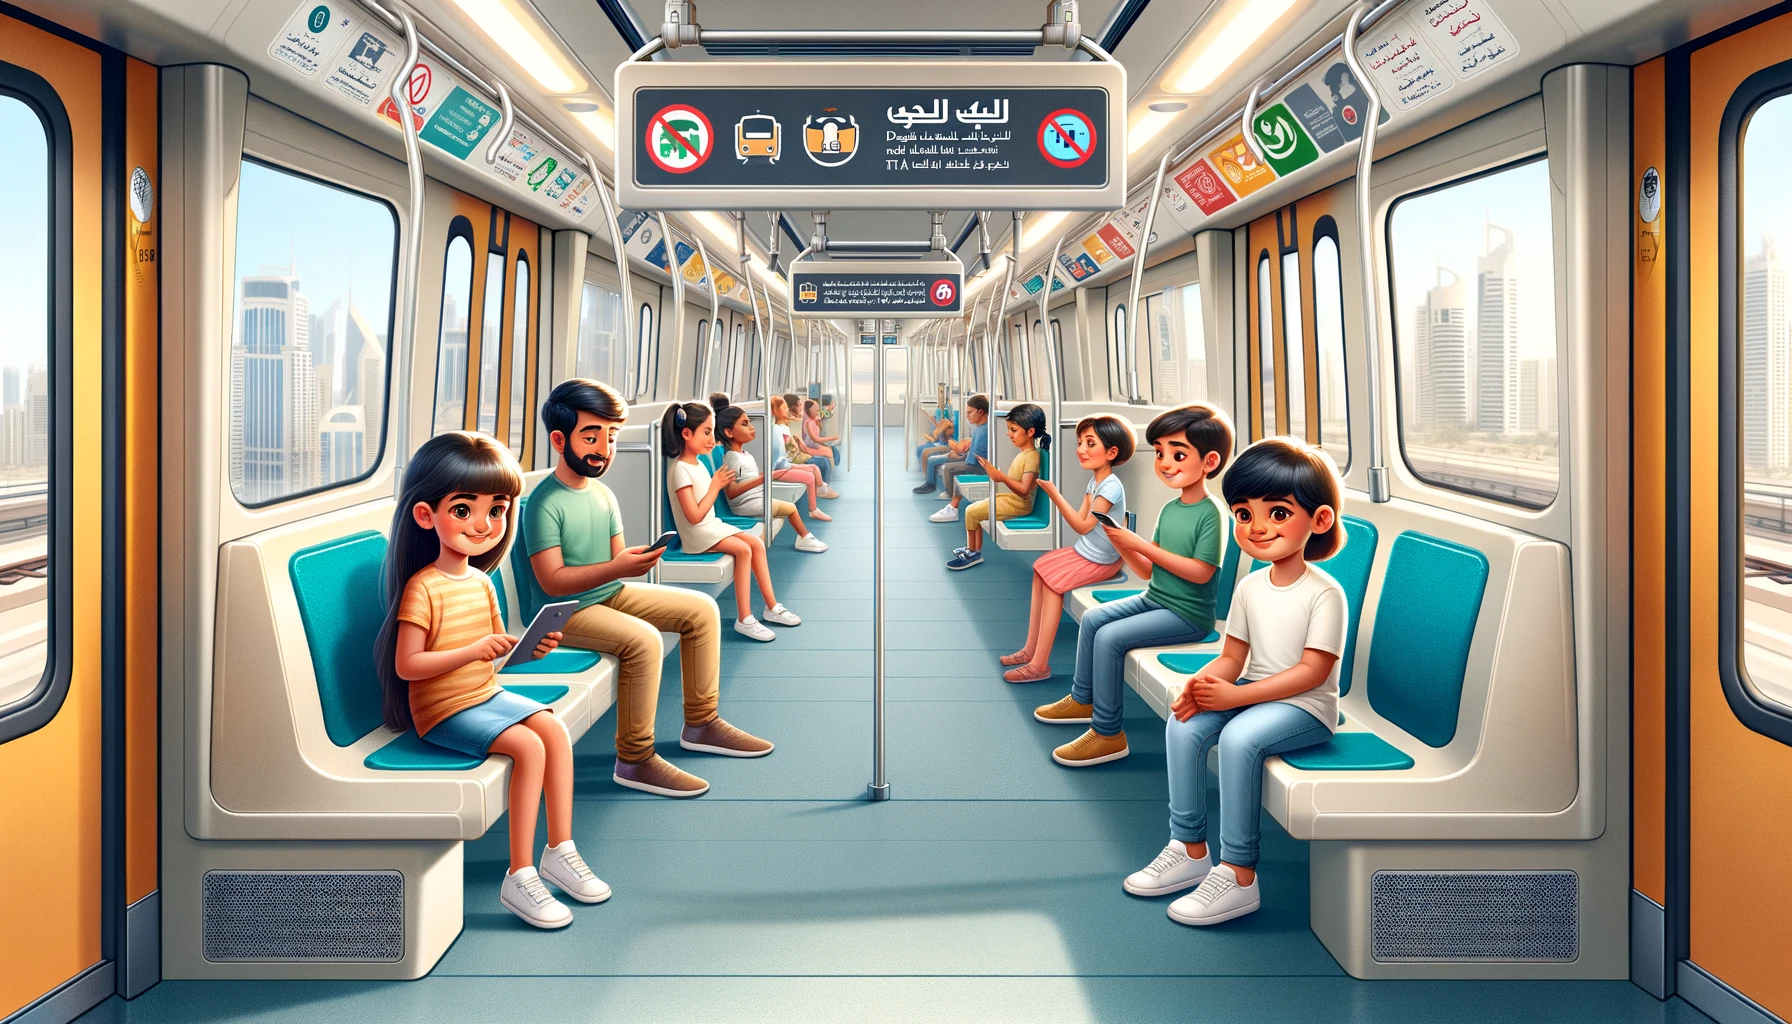 DALL·E 2024 01 11 17.18.26 An image showing children aged 8 11 traveling alone on a Dubai metro depicting them sitting inside the metro with safety measures in place. The child